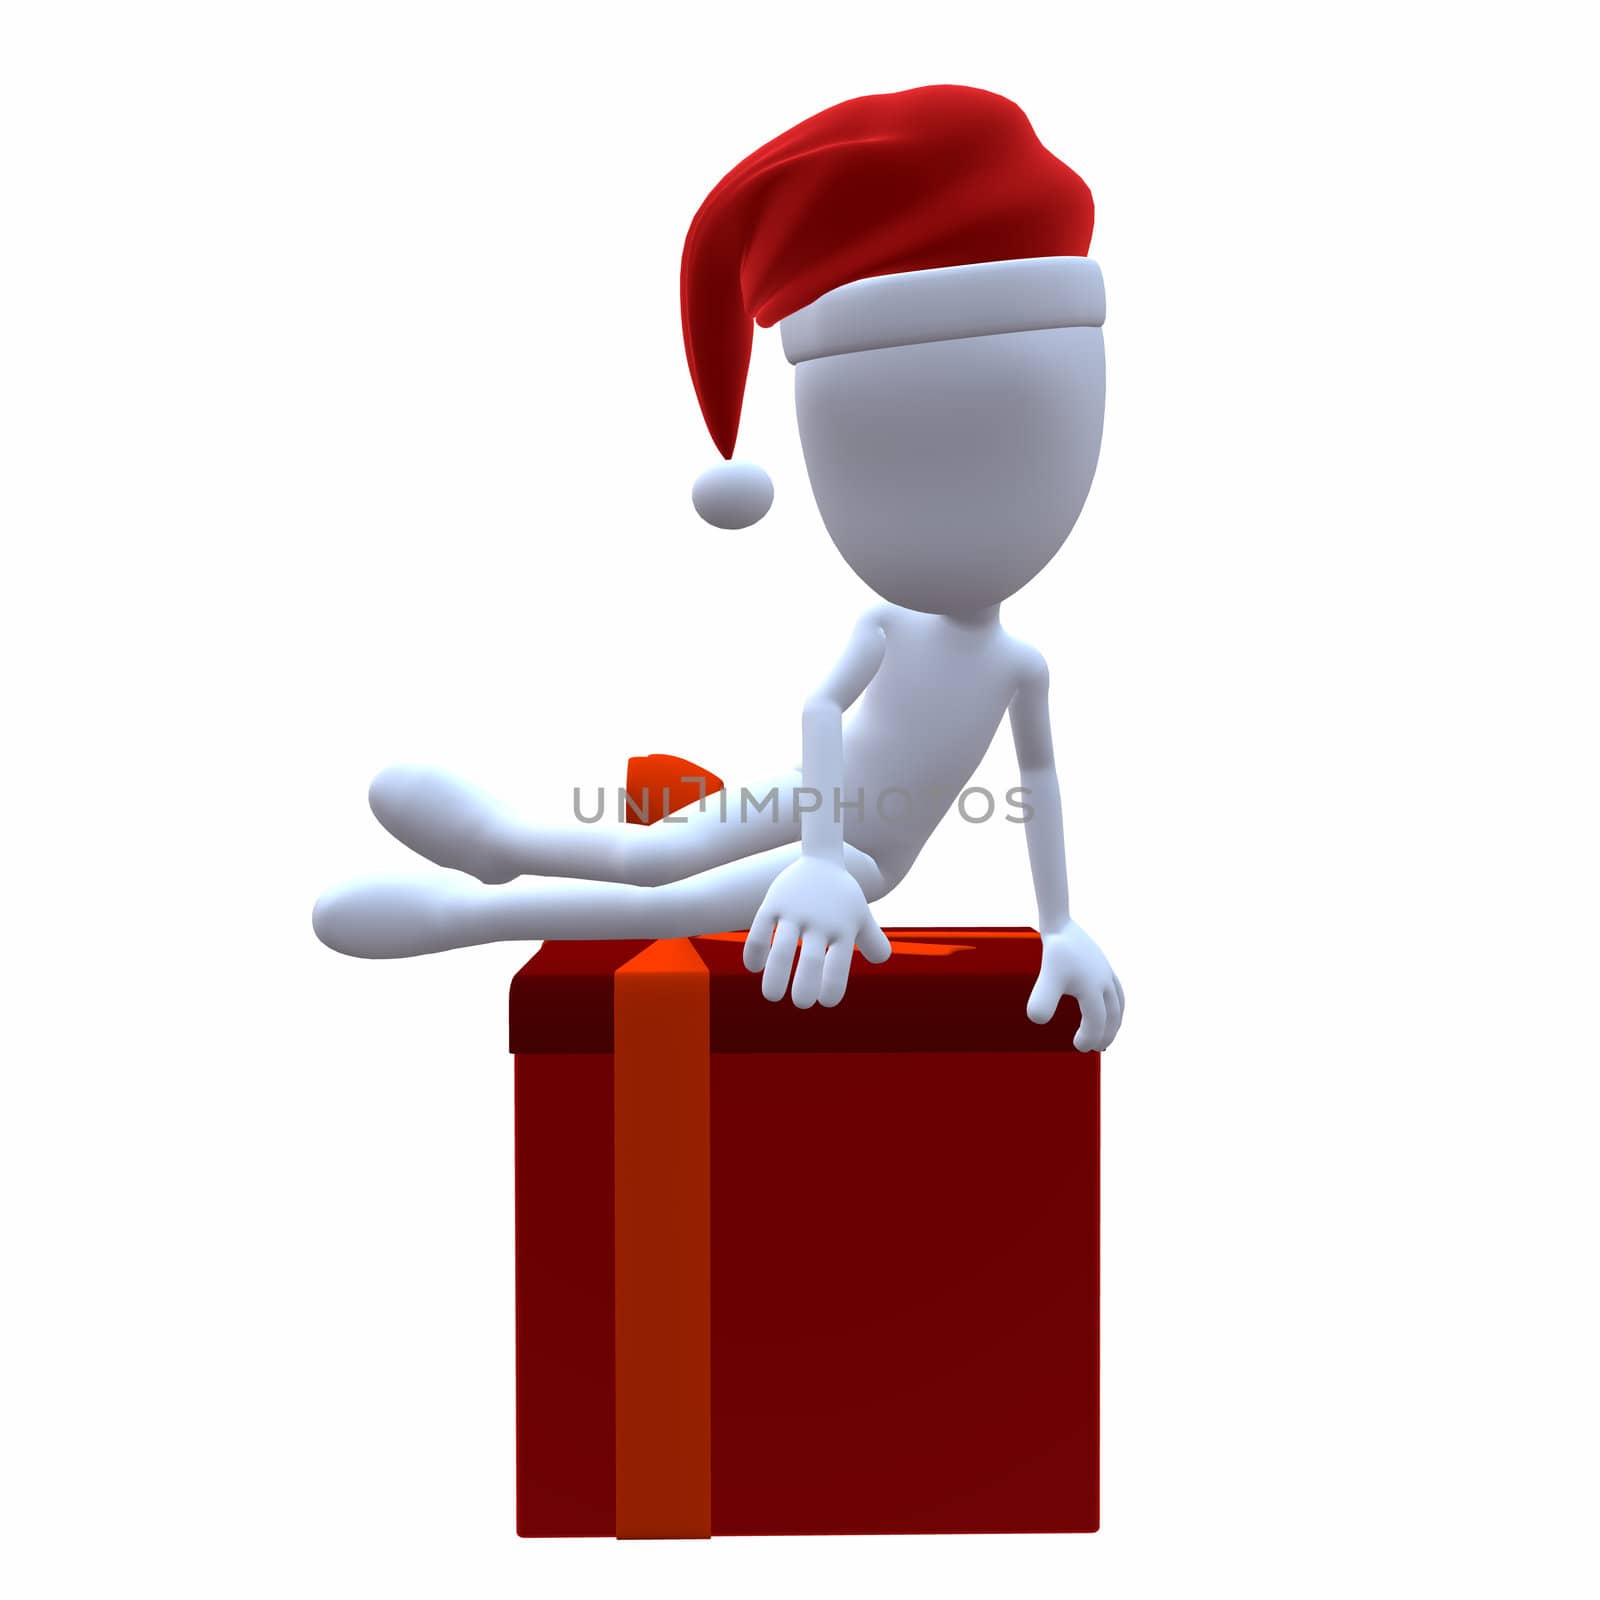 3D Christmas Guy Sitting On A Christmas Gift on a white background